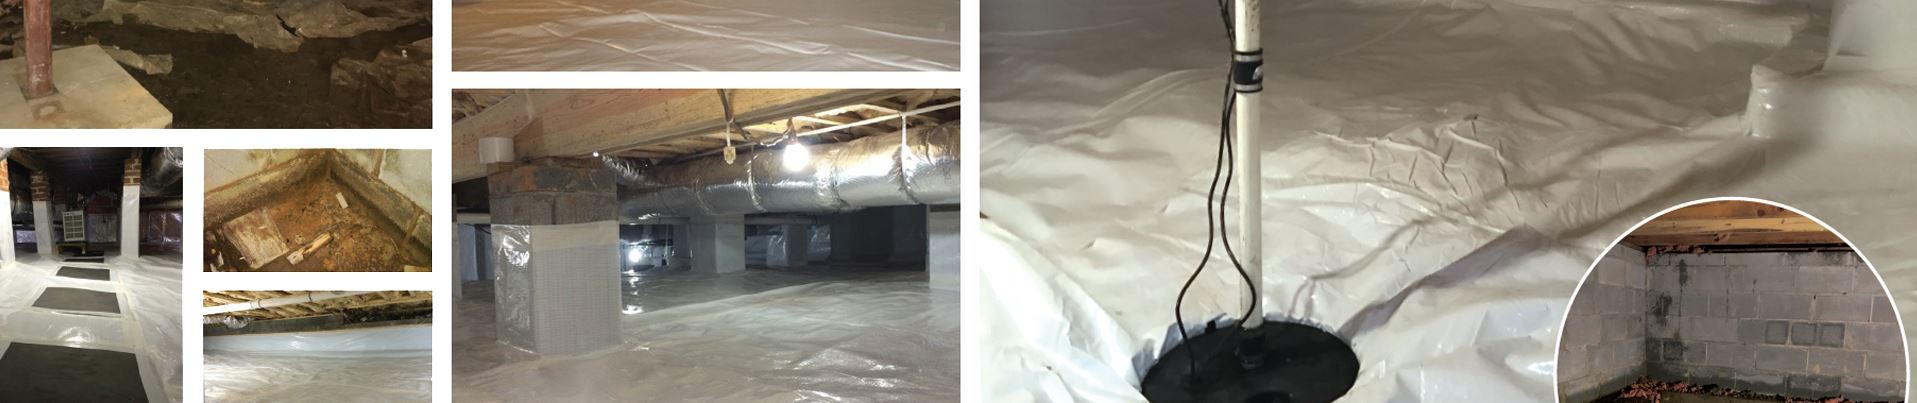 Encapsulated crawl space before and after